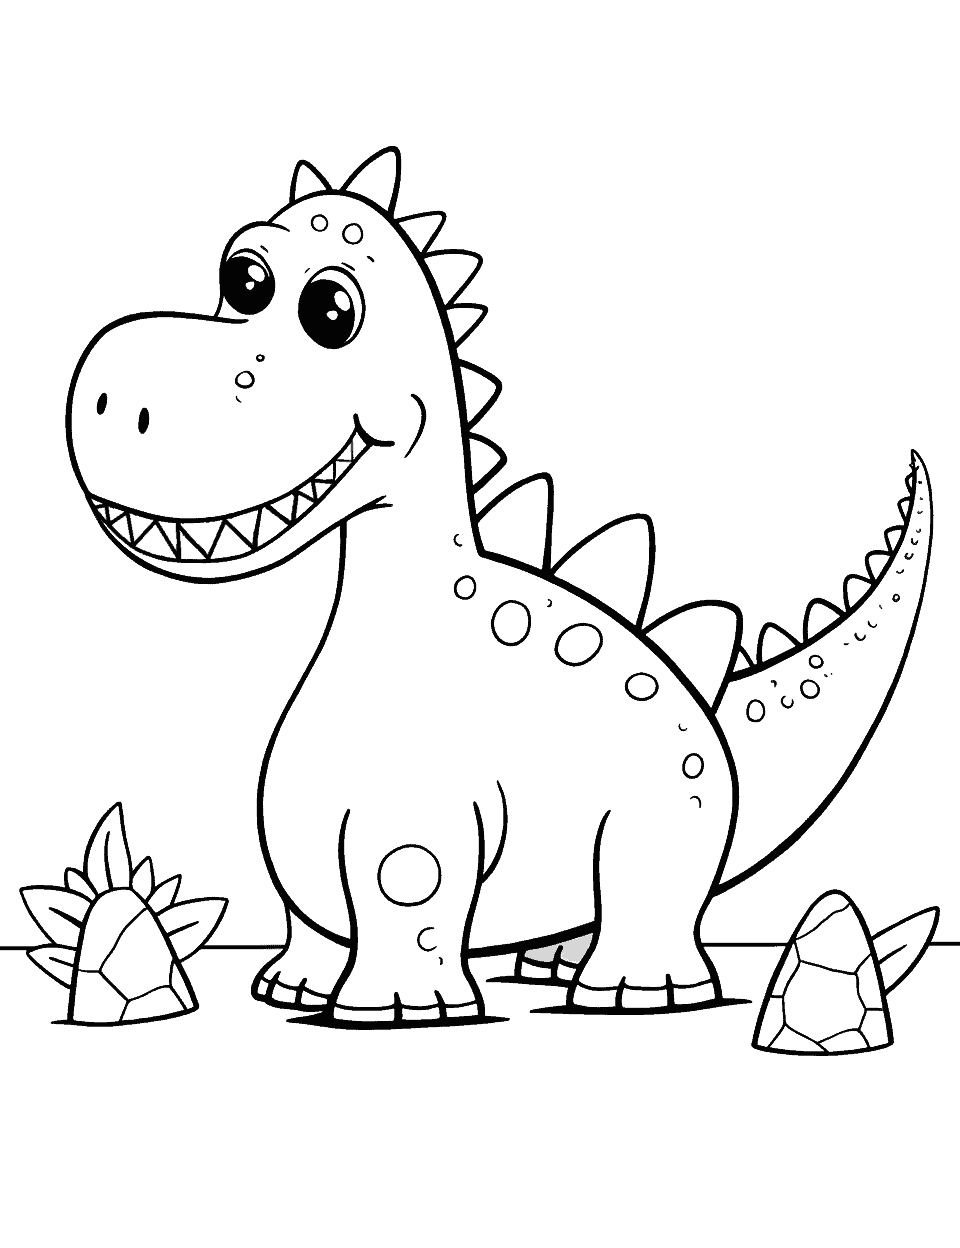 Easy Dino Shapes Dinosaur Coloring Page - Simple, basic shapes forming a cute dinosaur for beginners.